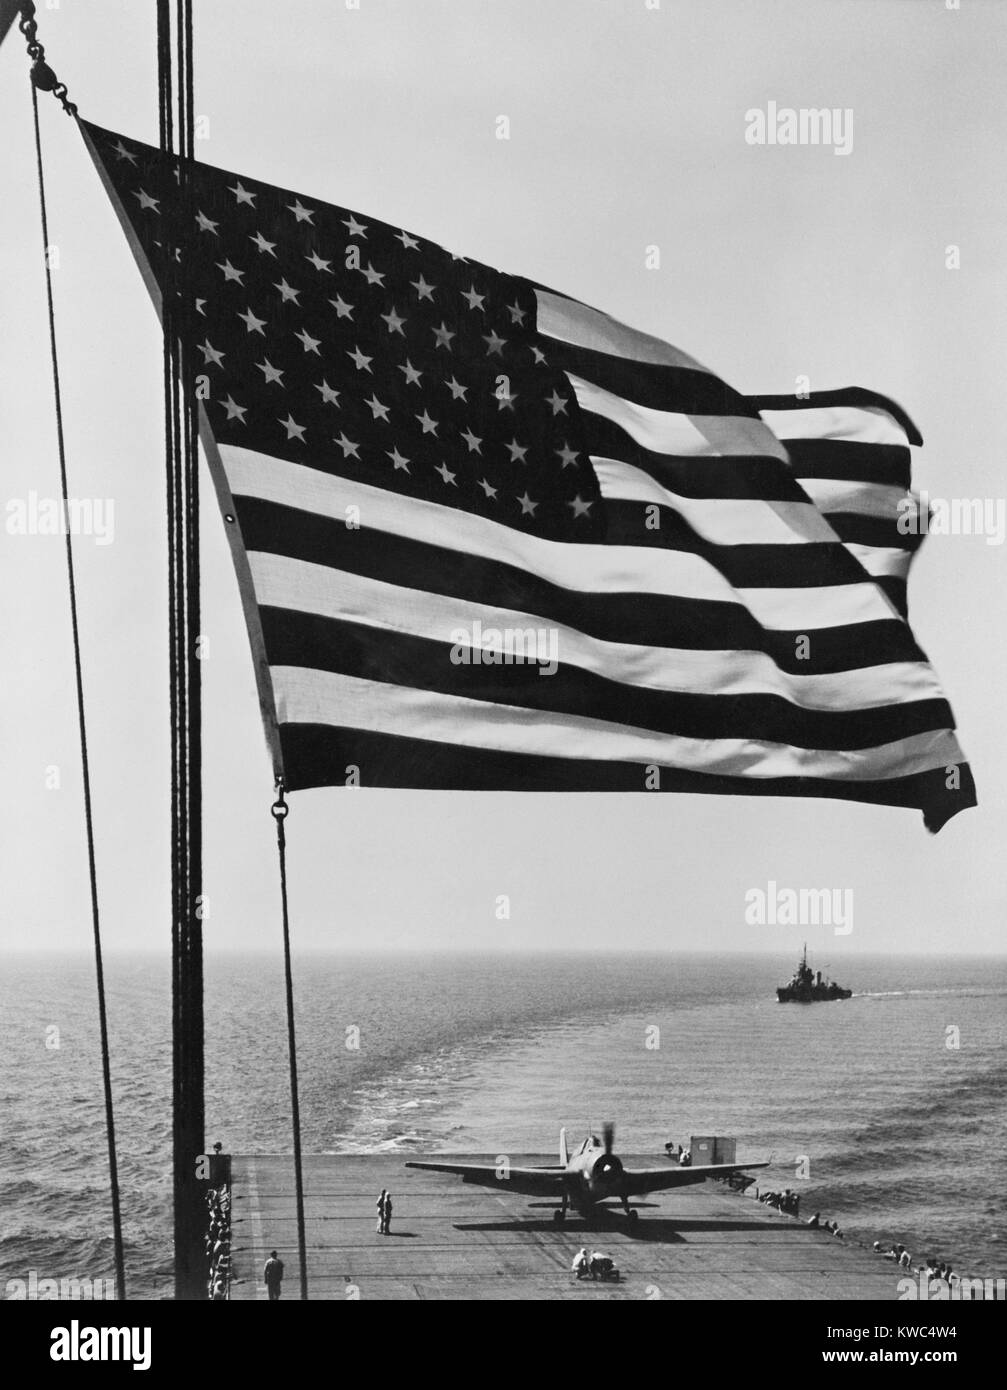 Flag of the United States snaps in the breeze over the USS Santee. November 1942. USS Santee was one of 4 escort carriers in Operation Torch, the Nov. 1942 Allied invasion of North Africa. Photo by Horace Bristol, member of the U.S. Naval Aviation Photographic Unit, under the command of Capt. Edward Steichen. World War 2. (BSLOC 2015 13 119) Stock Photo